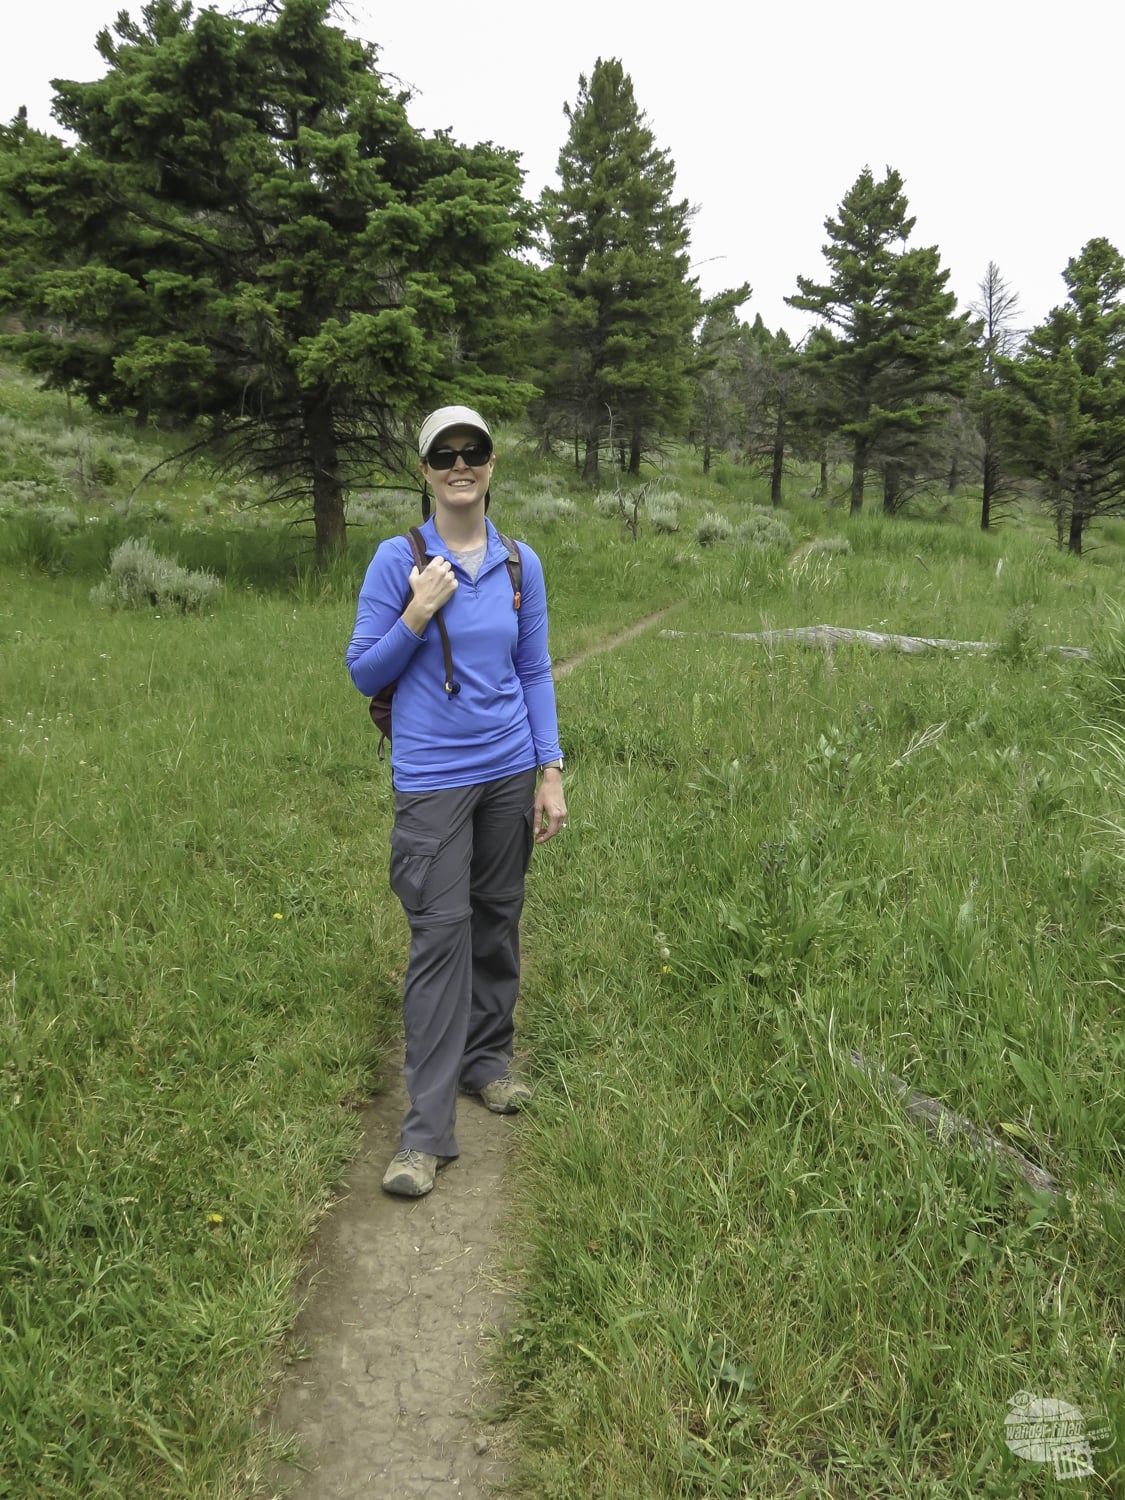 Bonnie on the trail in Yellowstone. Convertible pants are a great items for your Yellowstone packing list.